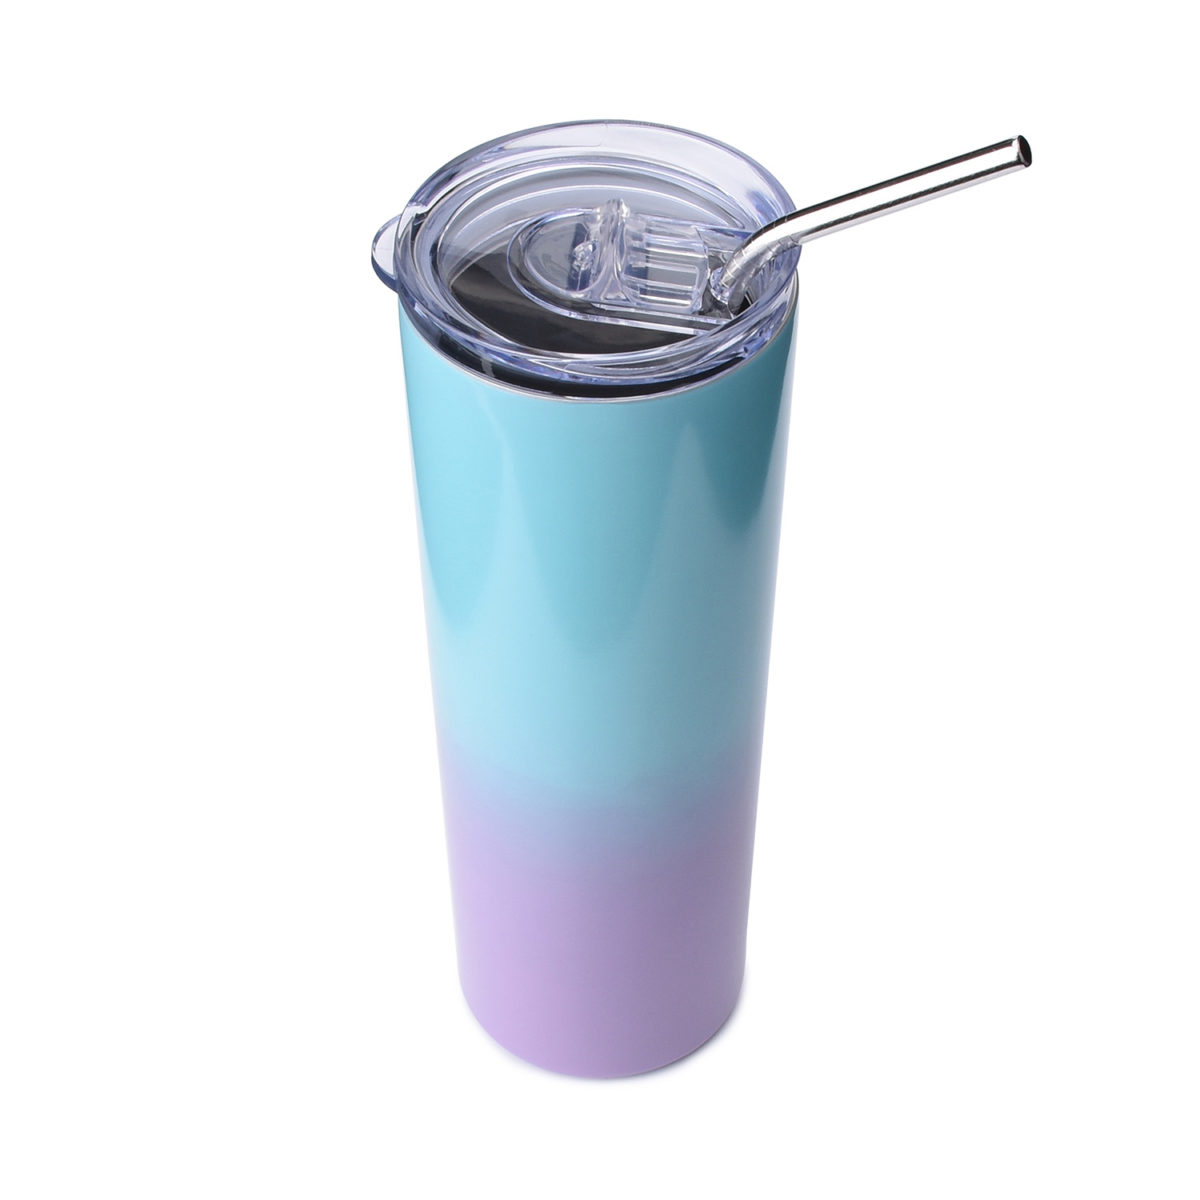 Wholesale Tumbler Cups With Straws Products at Factory Prices from